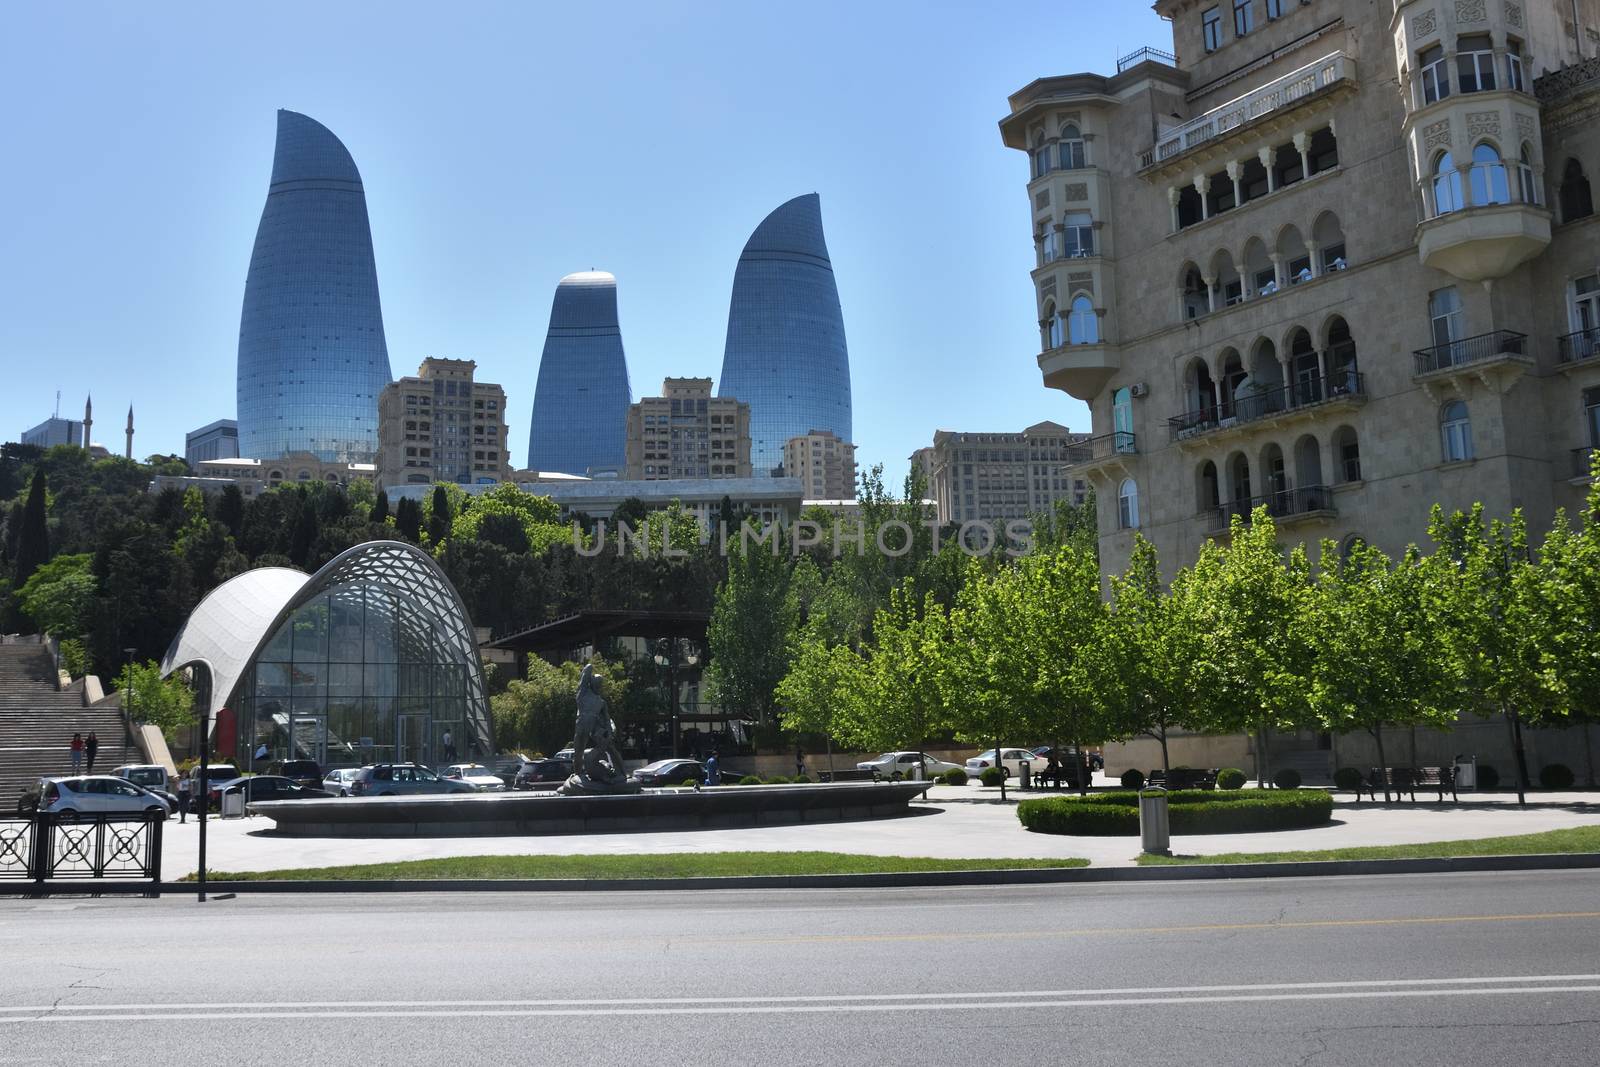 One of the types of the city of Baku. by moviephoto